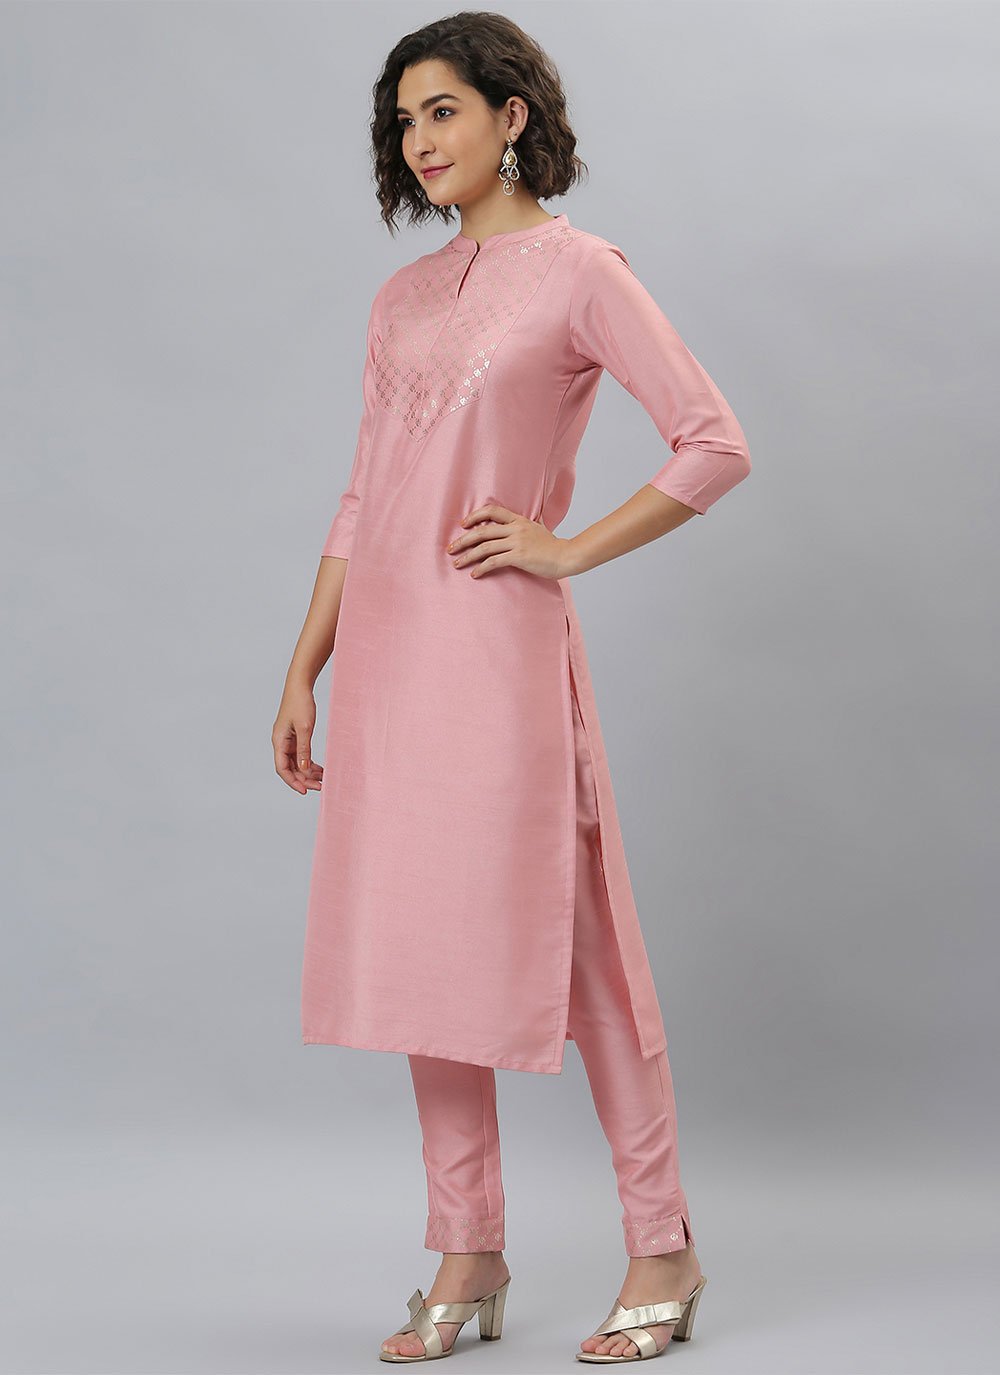 What are the latest Salwar Kameez designs? - Quora